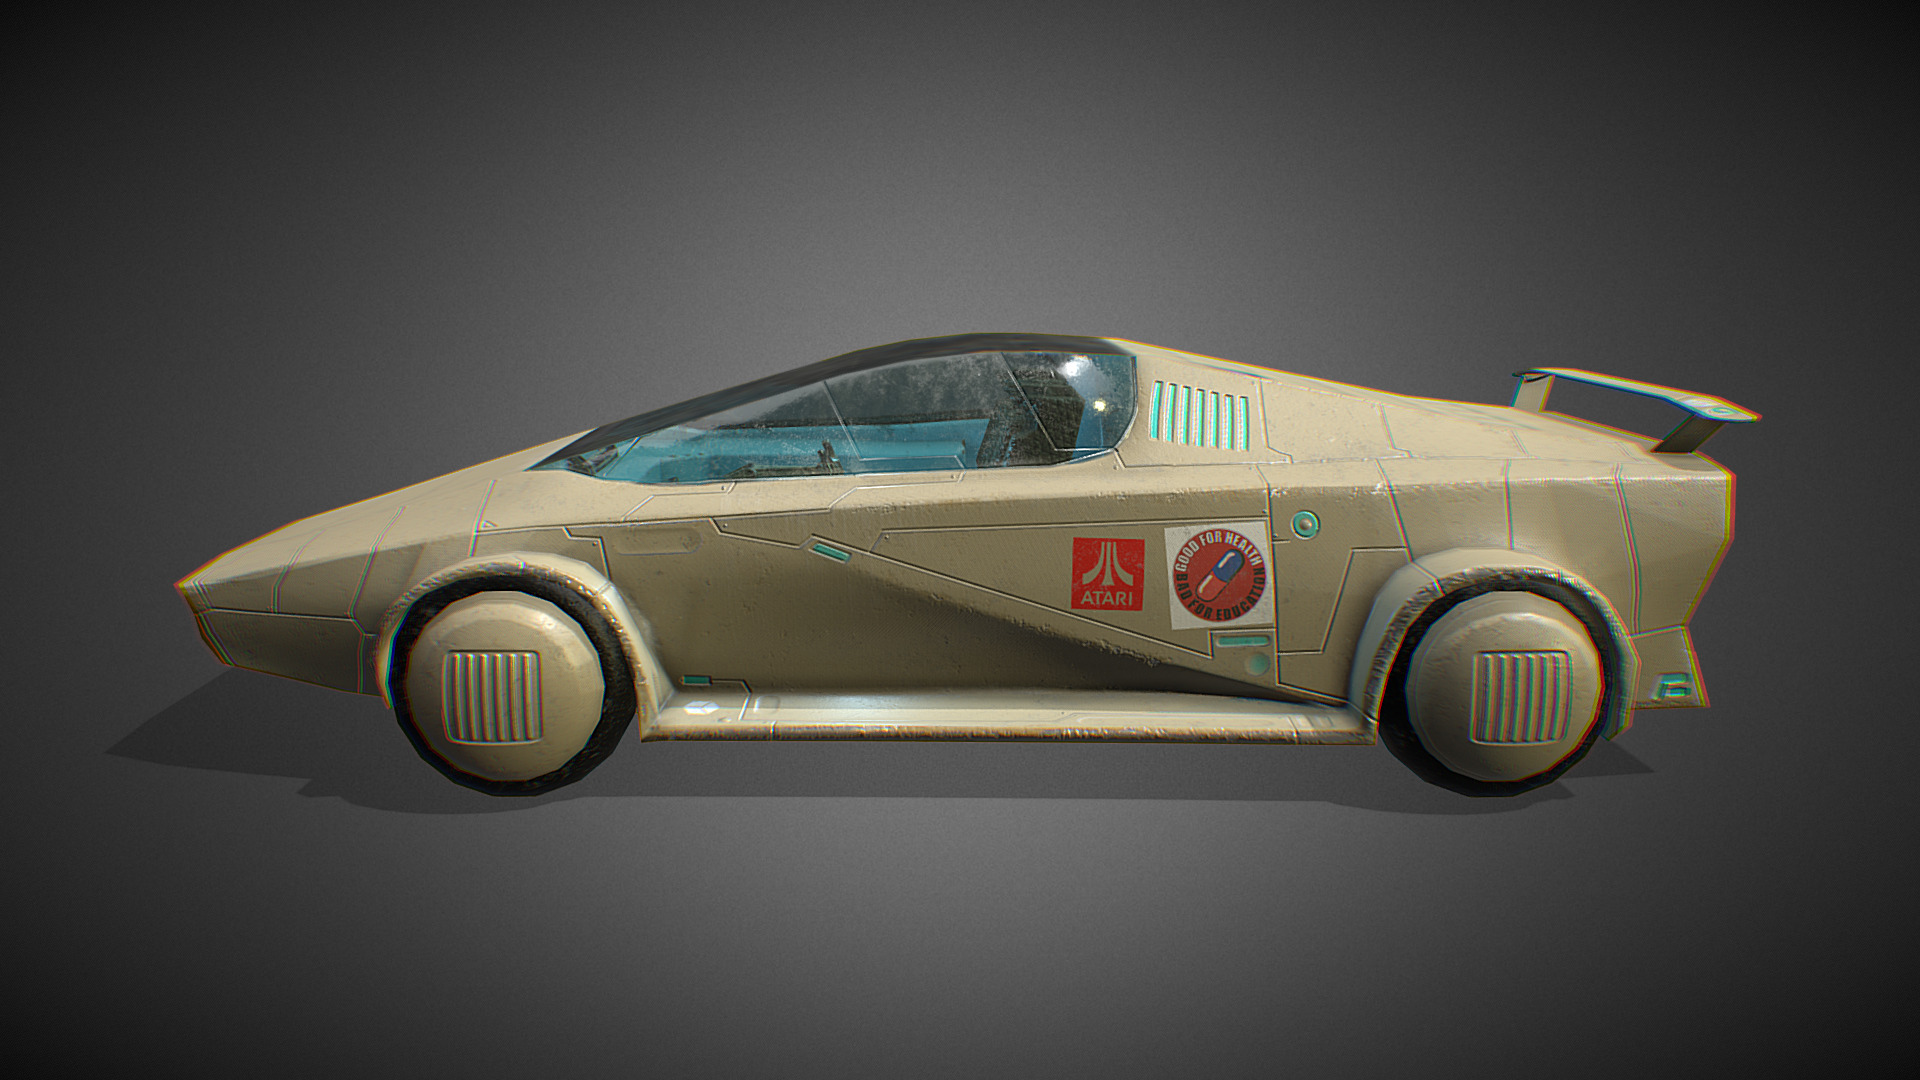 3D model Cyberpunk Sportcar – with Interiors - This is a 3D model of the Cyberpunk Sportcar - with Interiors. The 3D model is about a model of a space shuttle.